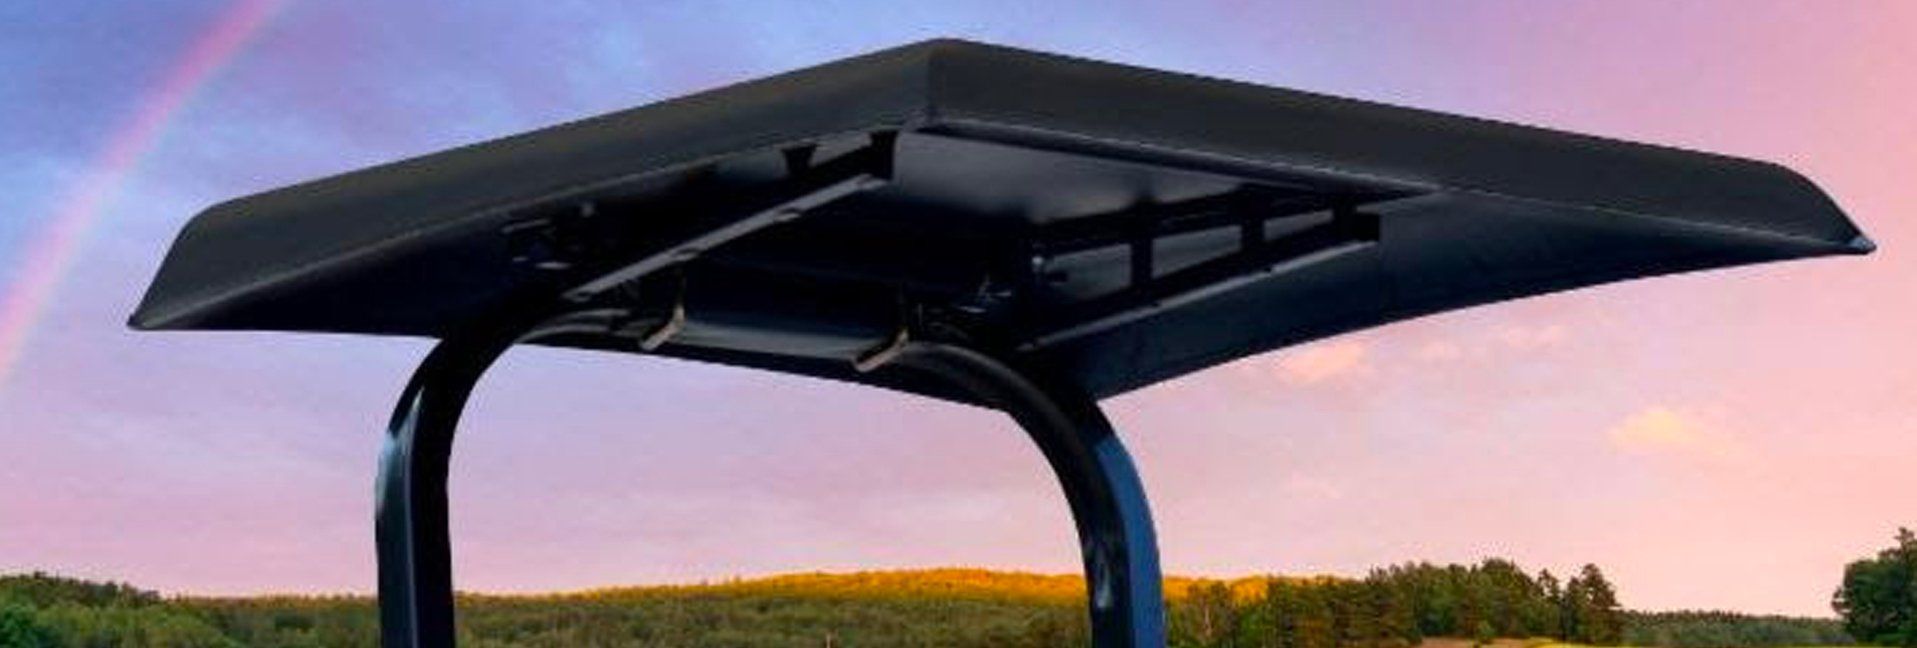 Introducing the Curtis Advantage ROPS-Mount Canopy